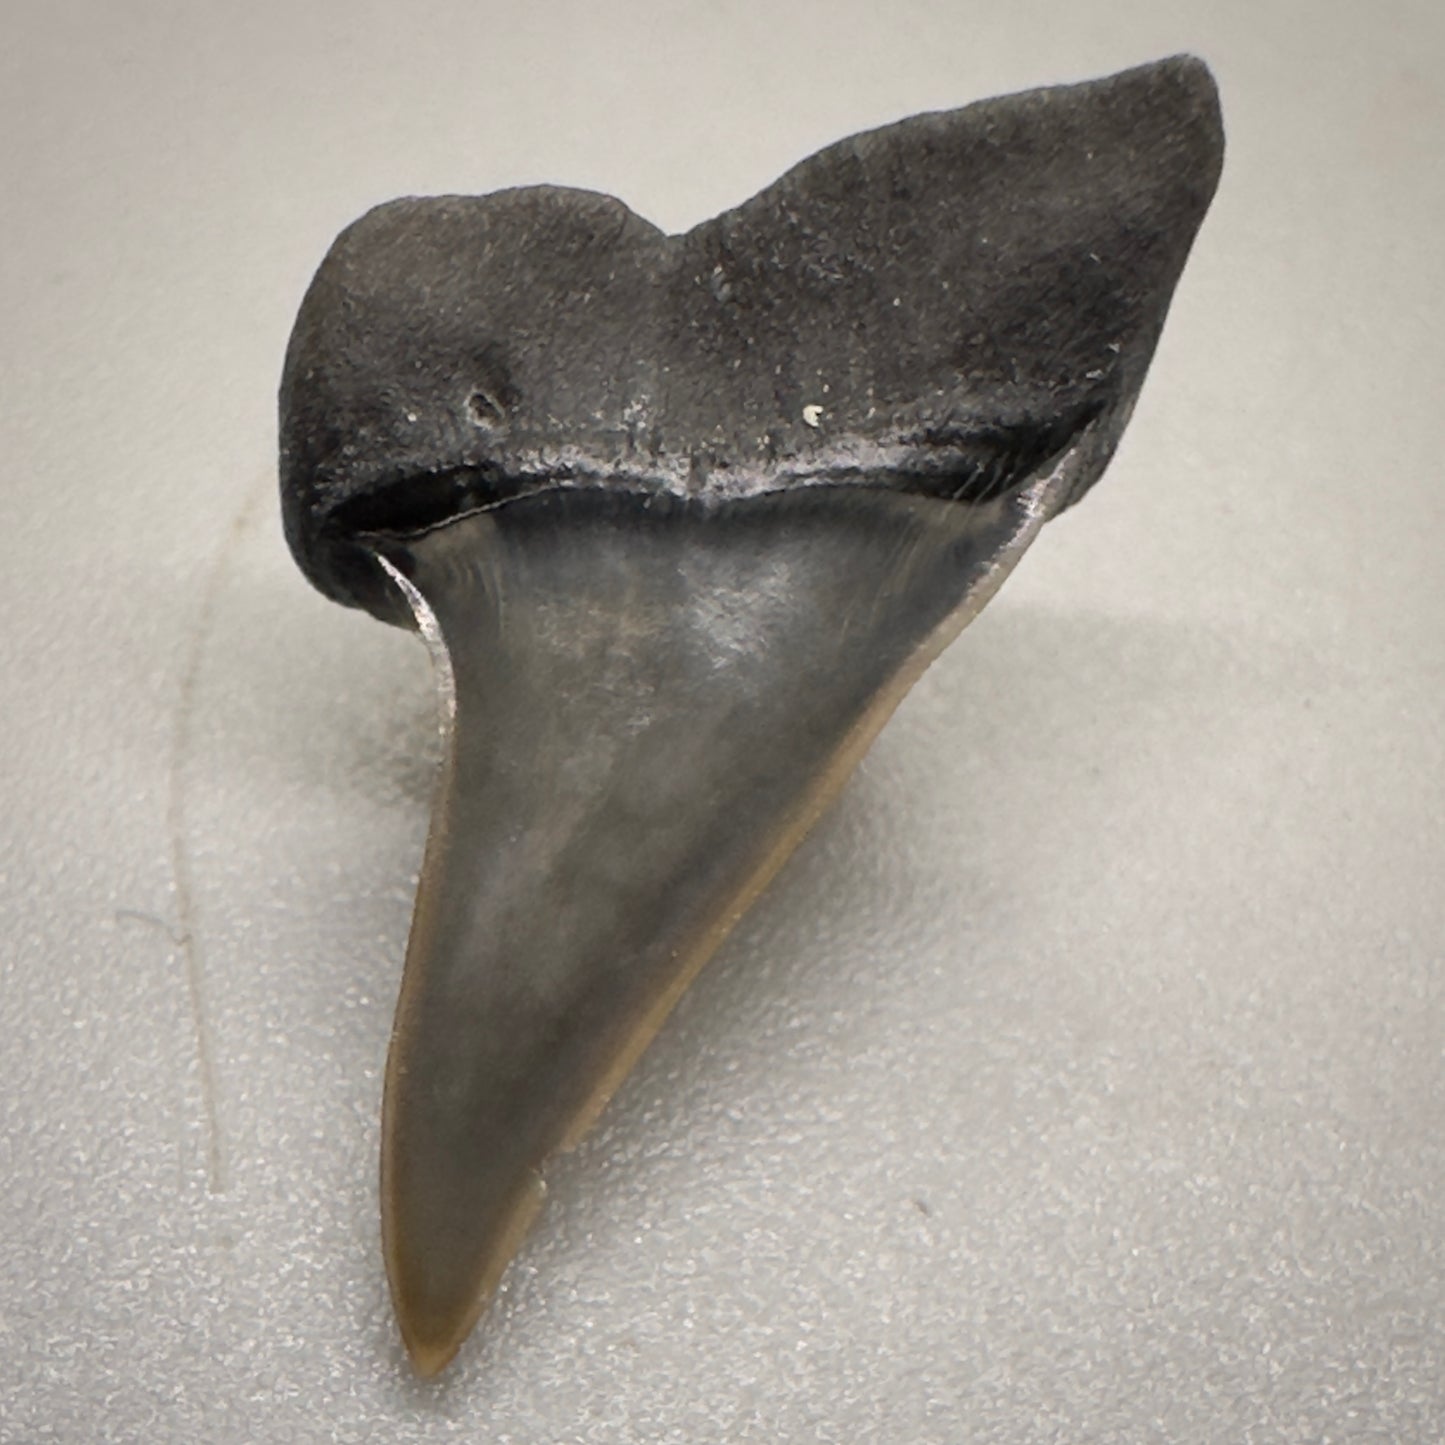 0.87 inches Xiphodolamia ensis - Extinct Mackerel Fossil Shark tooth from Western Kazakhstan R507 back down